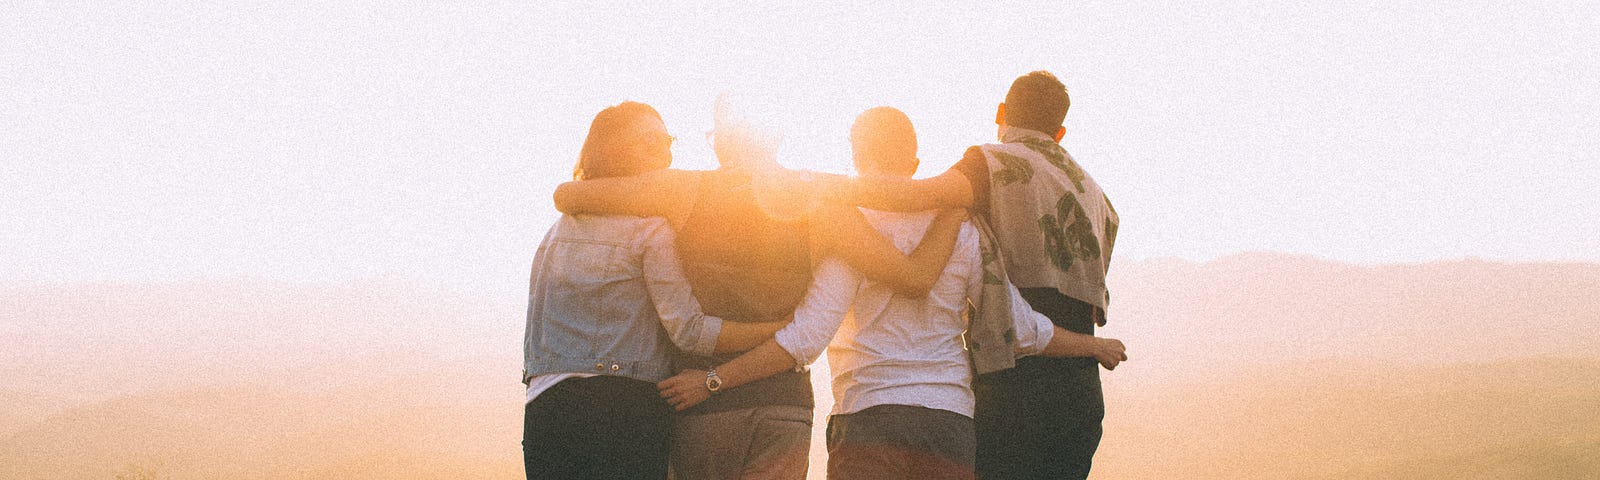 4 people standing, facing the sun hugging each other sideways